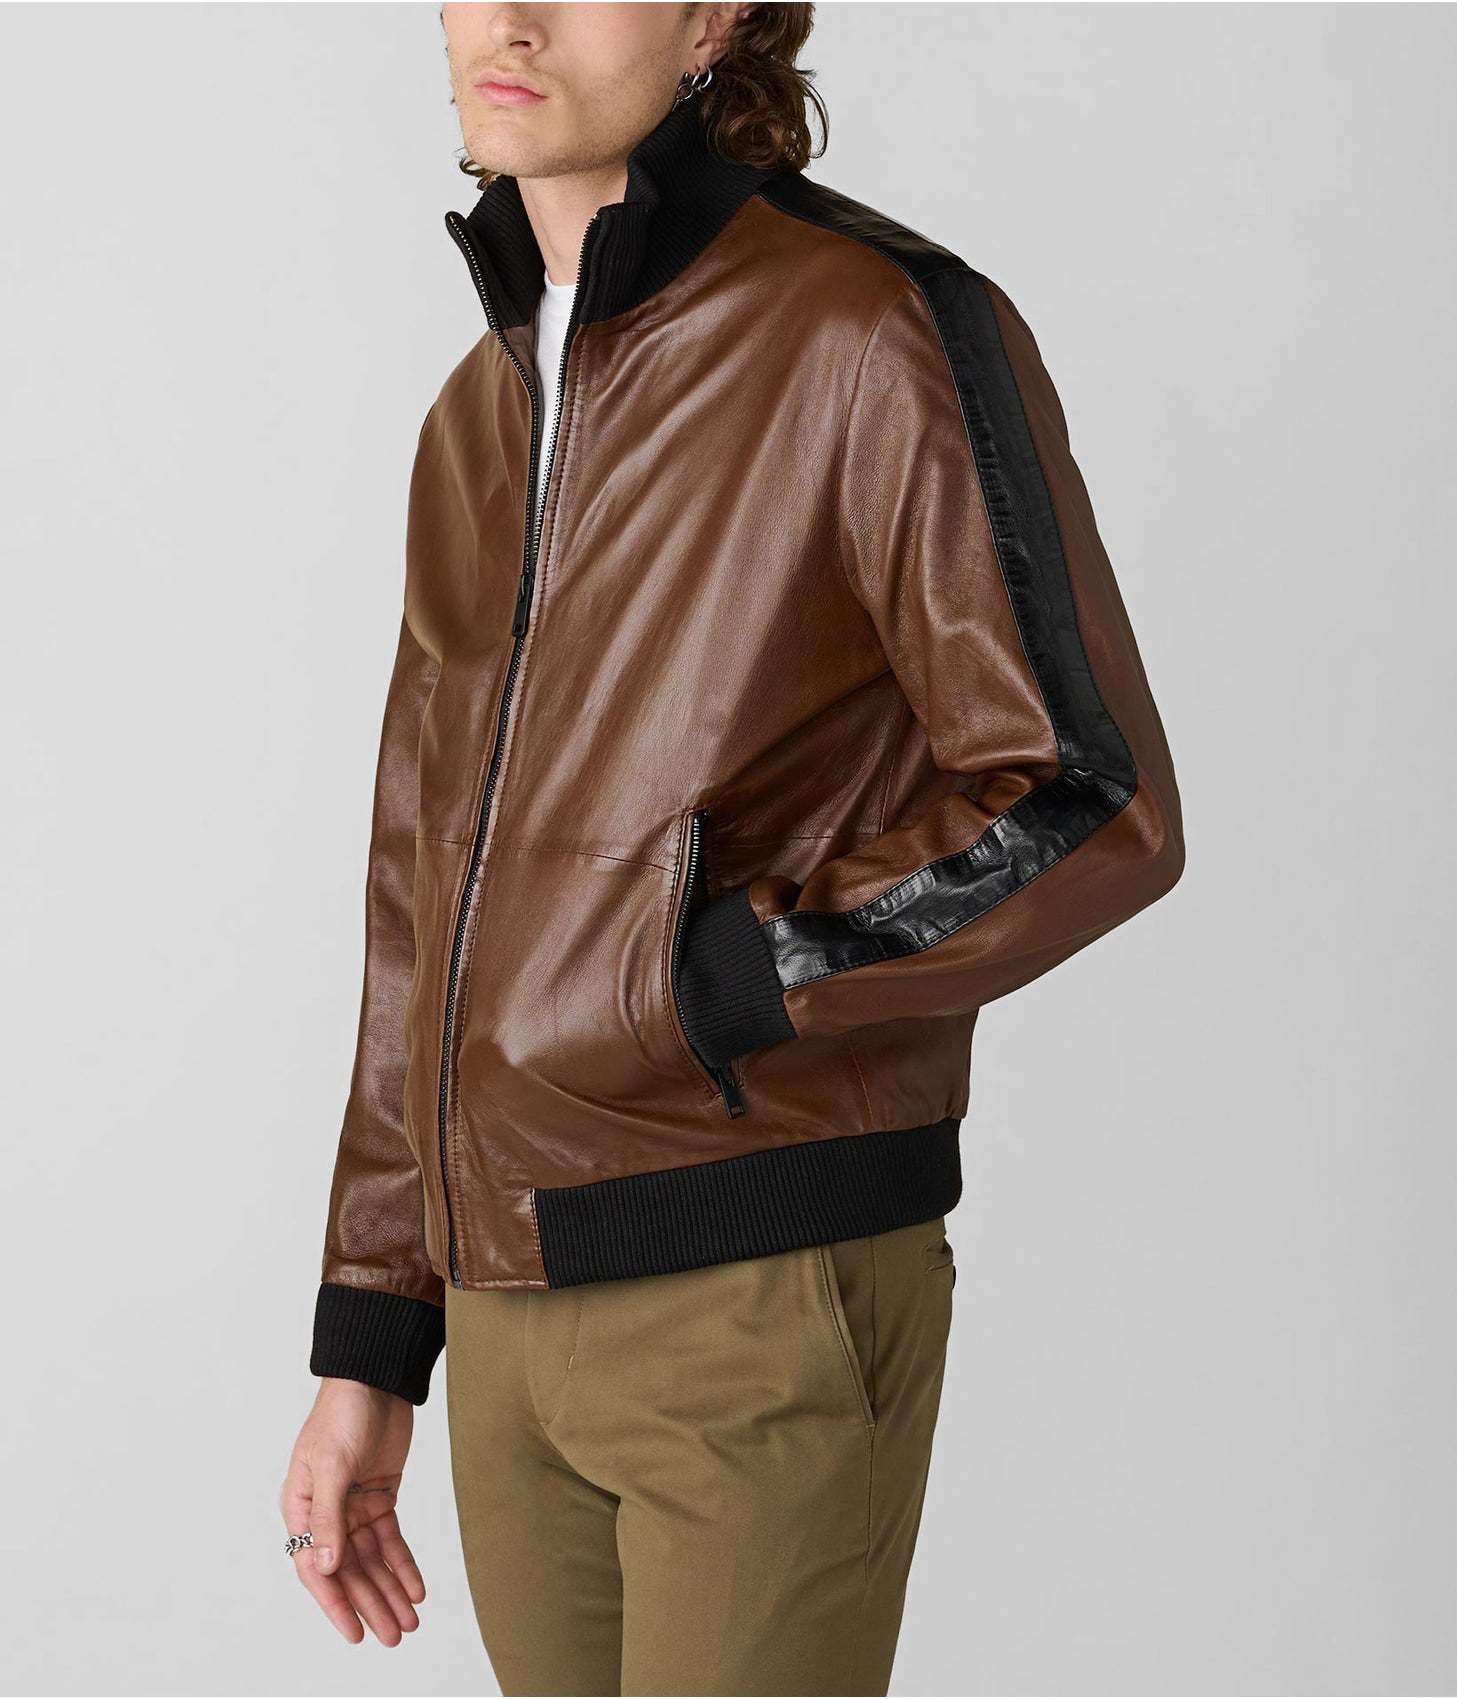 Men's Leather Bomber Jacket In Chocolate Brown With Stripes